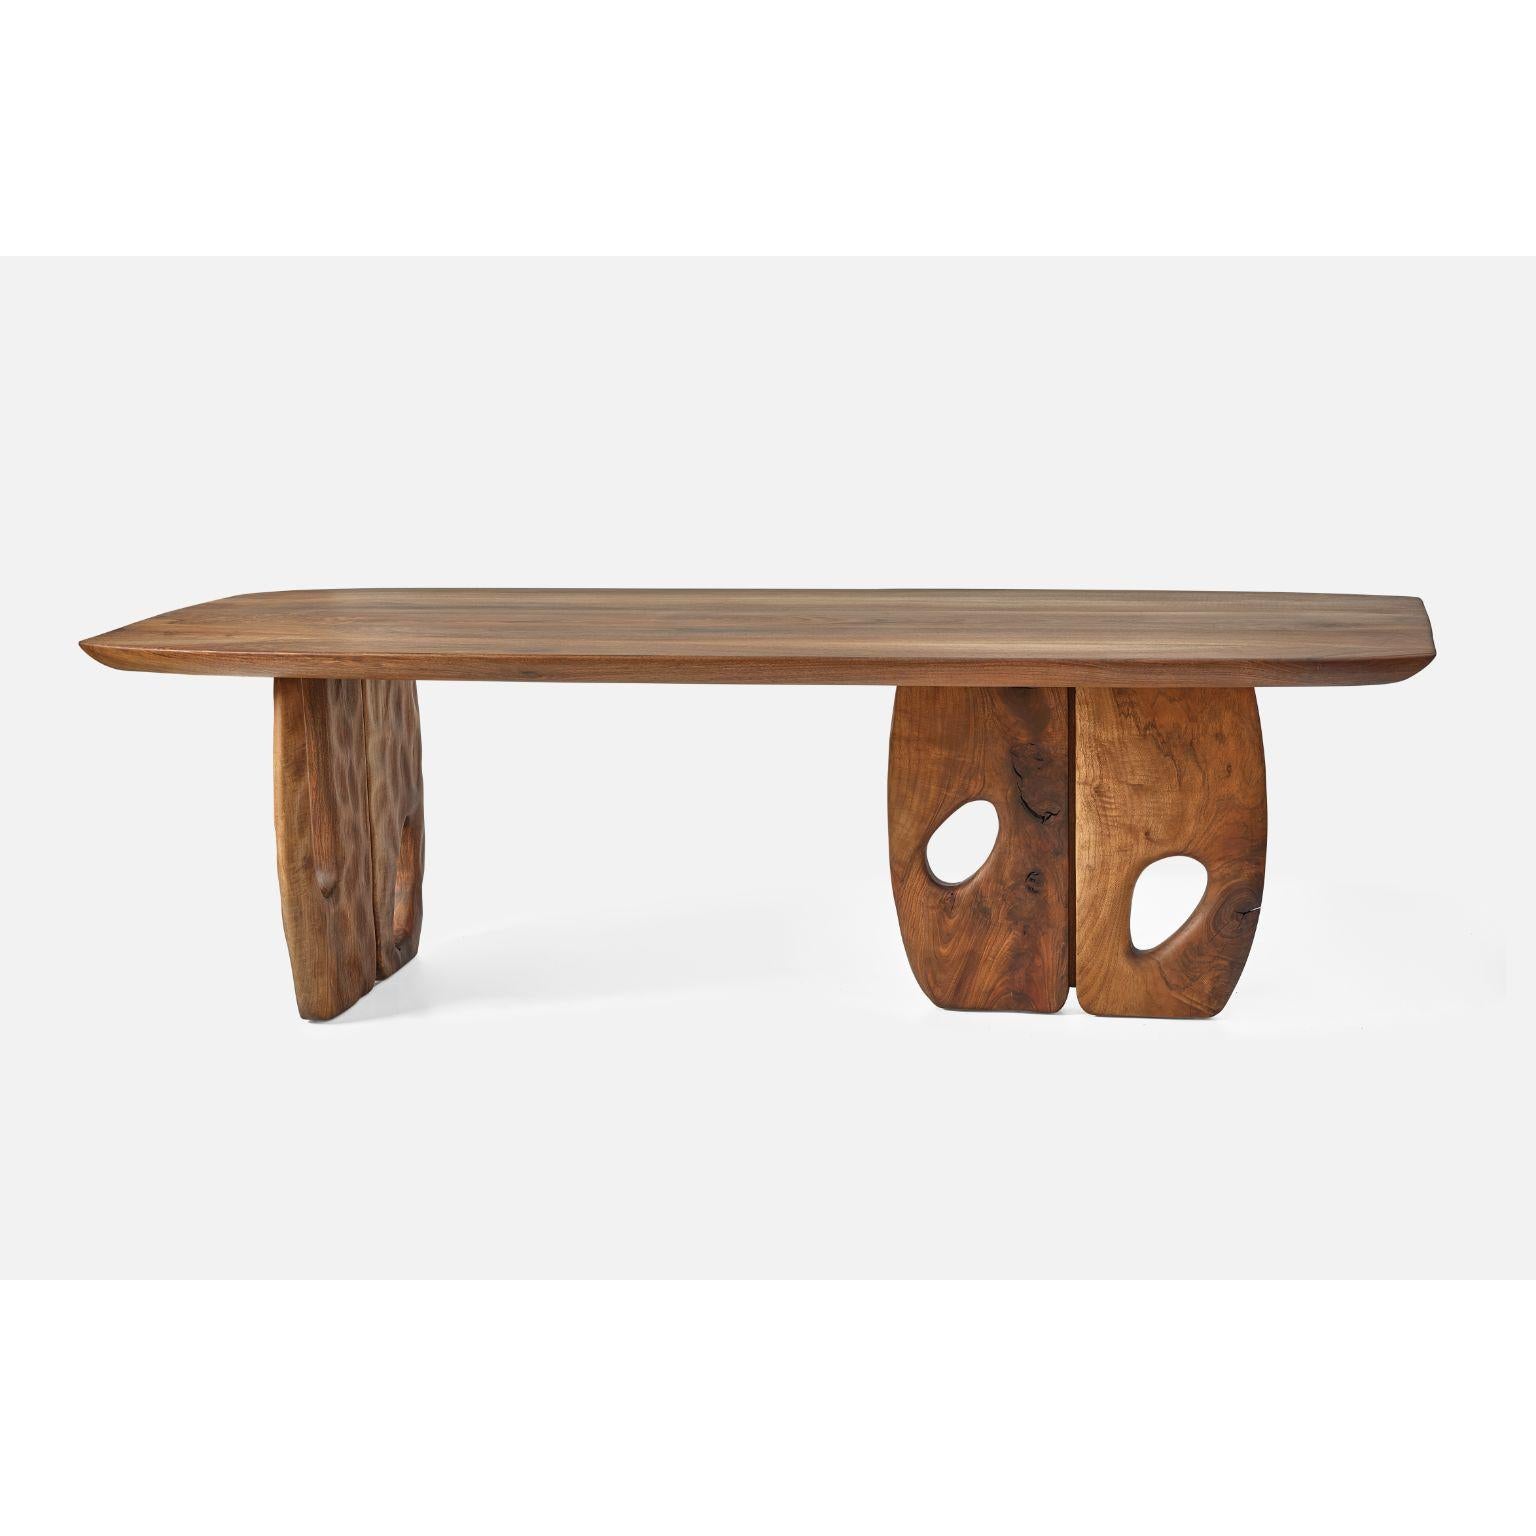 Kaya Dining Table L by Contemporary Ecowood
Dimensions: W 315 x D 300 x H 75 cm.
Materials: American Clora Walnut.
Color: Natural

Contemporary Ecowood’s story began in a craft workshop in 2009. Our wood passion made us focus on fallen trees in the